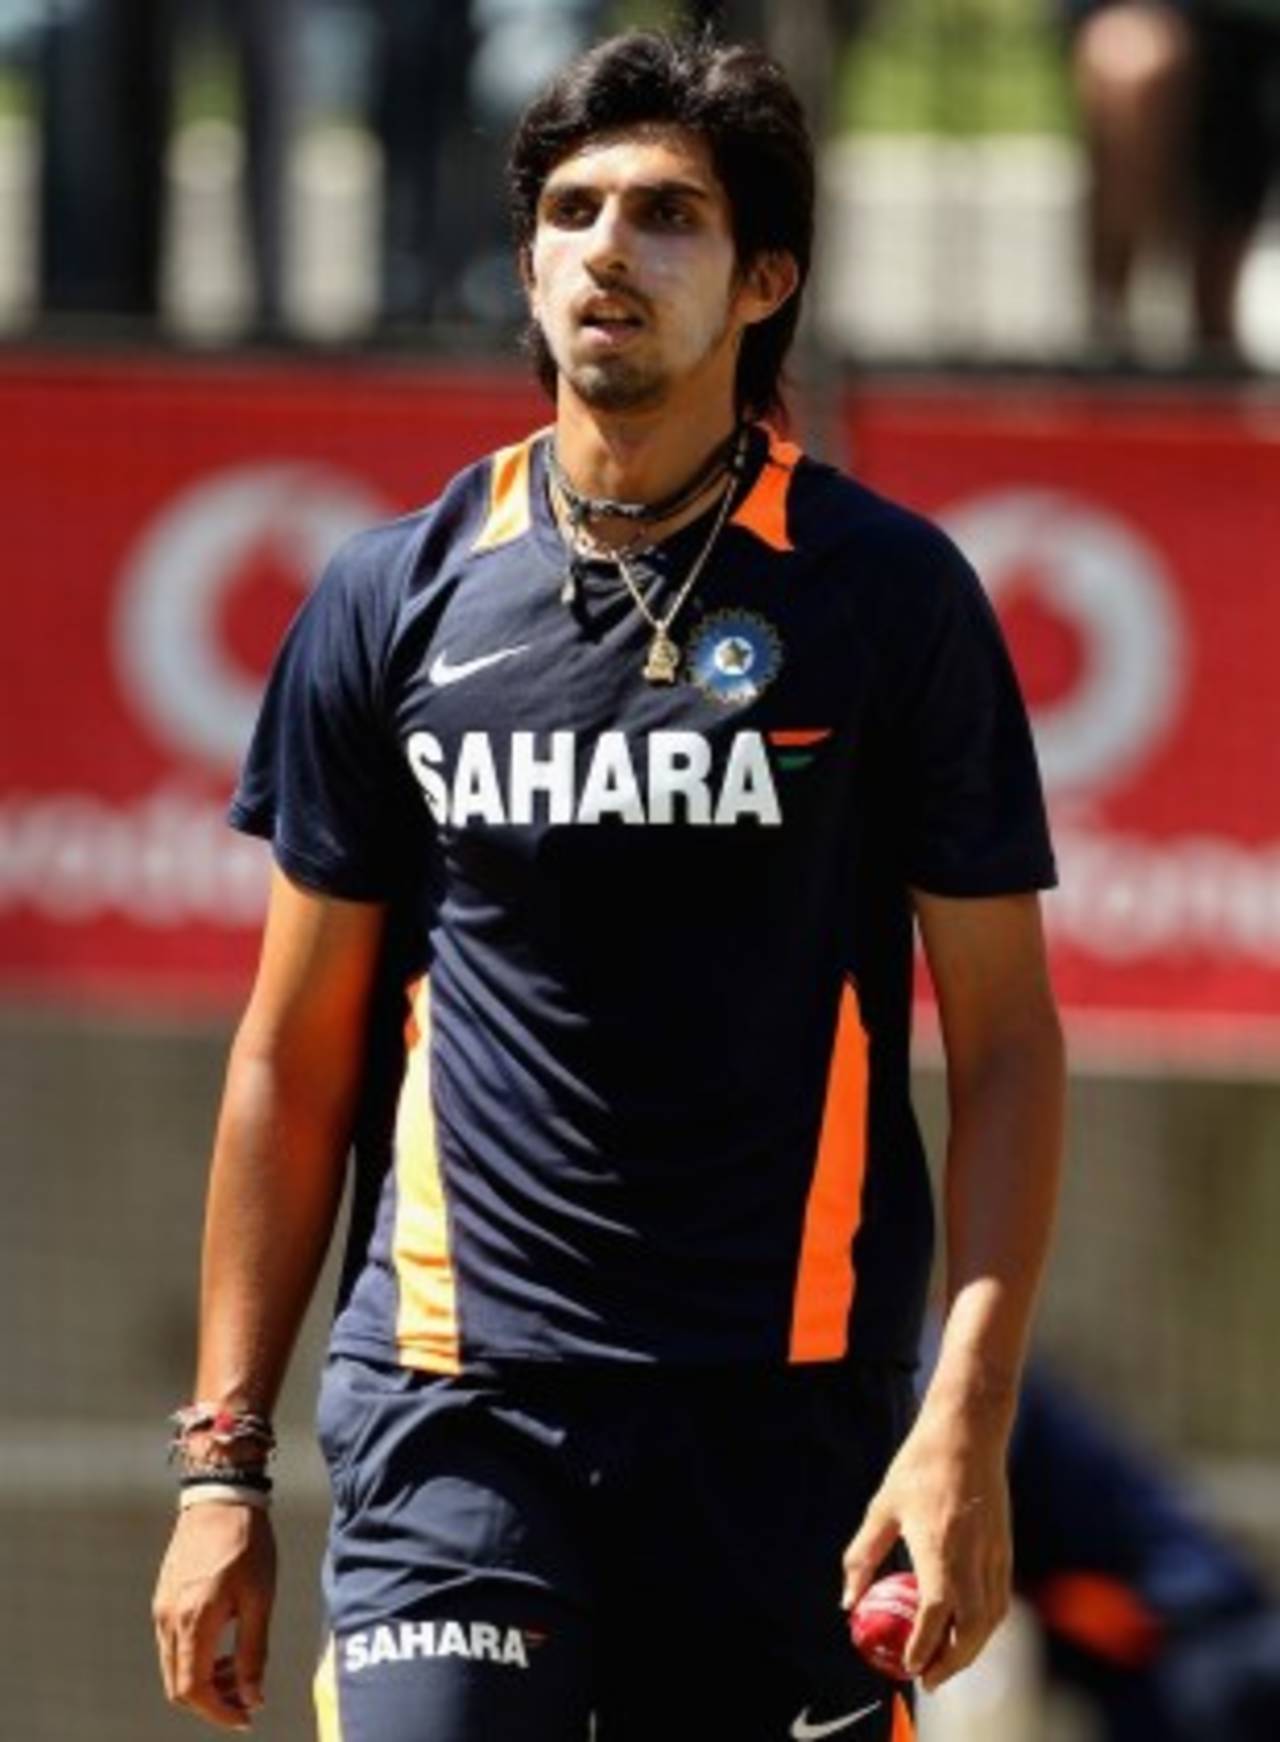 Ishant Sharma cut a relaxed figure as he trained at the nets, despite his strapped ankle&nbsp;&nbsp;&bull;&nbsp;&nbsp;Getty Images